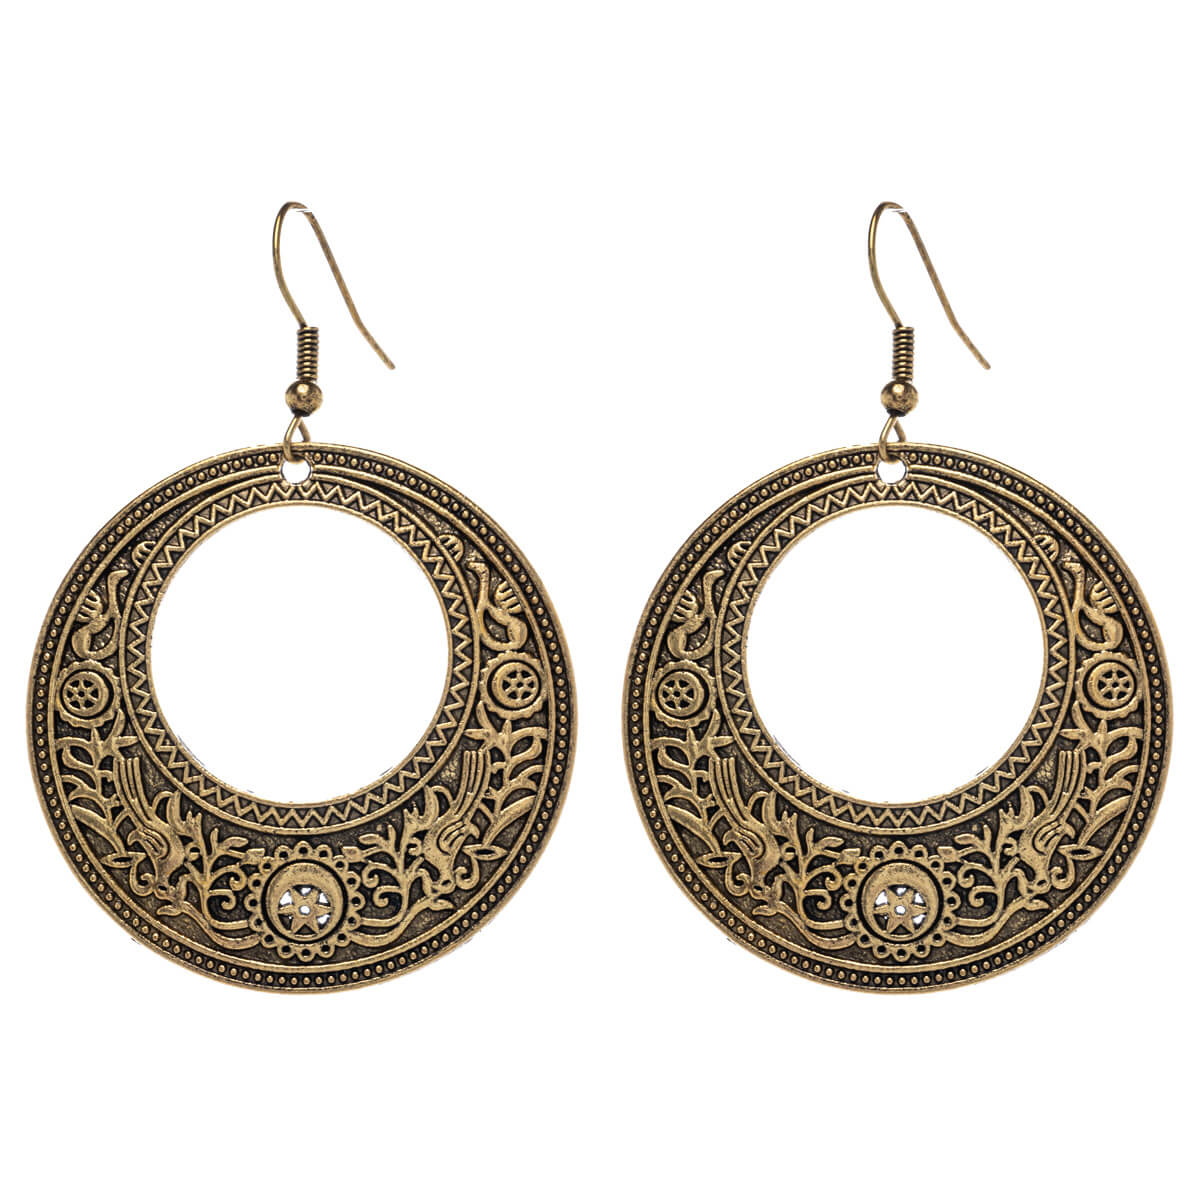 Textured round earrings